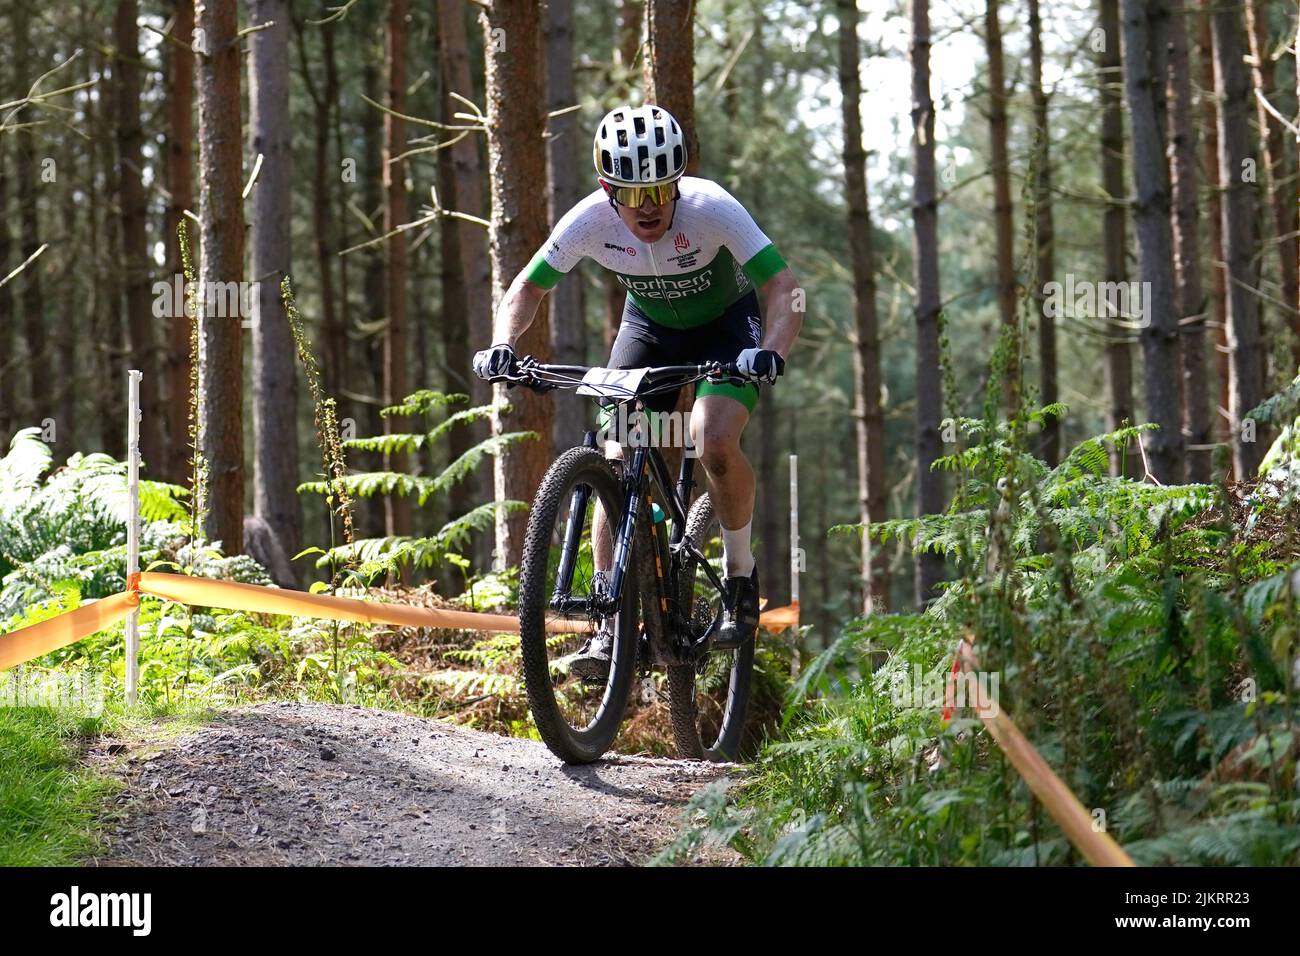 Northern Ireland's Christopher McGlinchey during the Men's Cross-country final at Cannock Chase on day six of the 2022 Commonwealth Games. Picture date: Wednesday August 3, 2022. Stock Photo